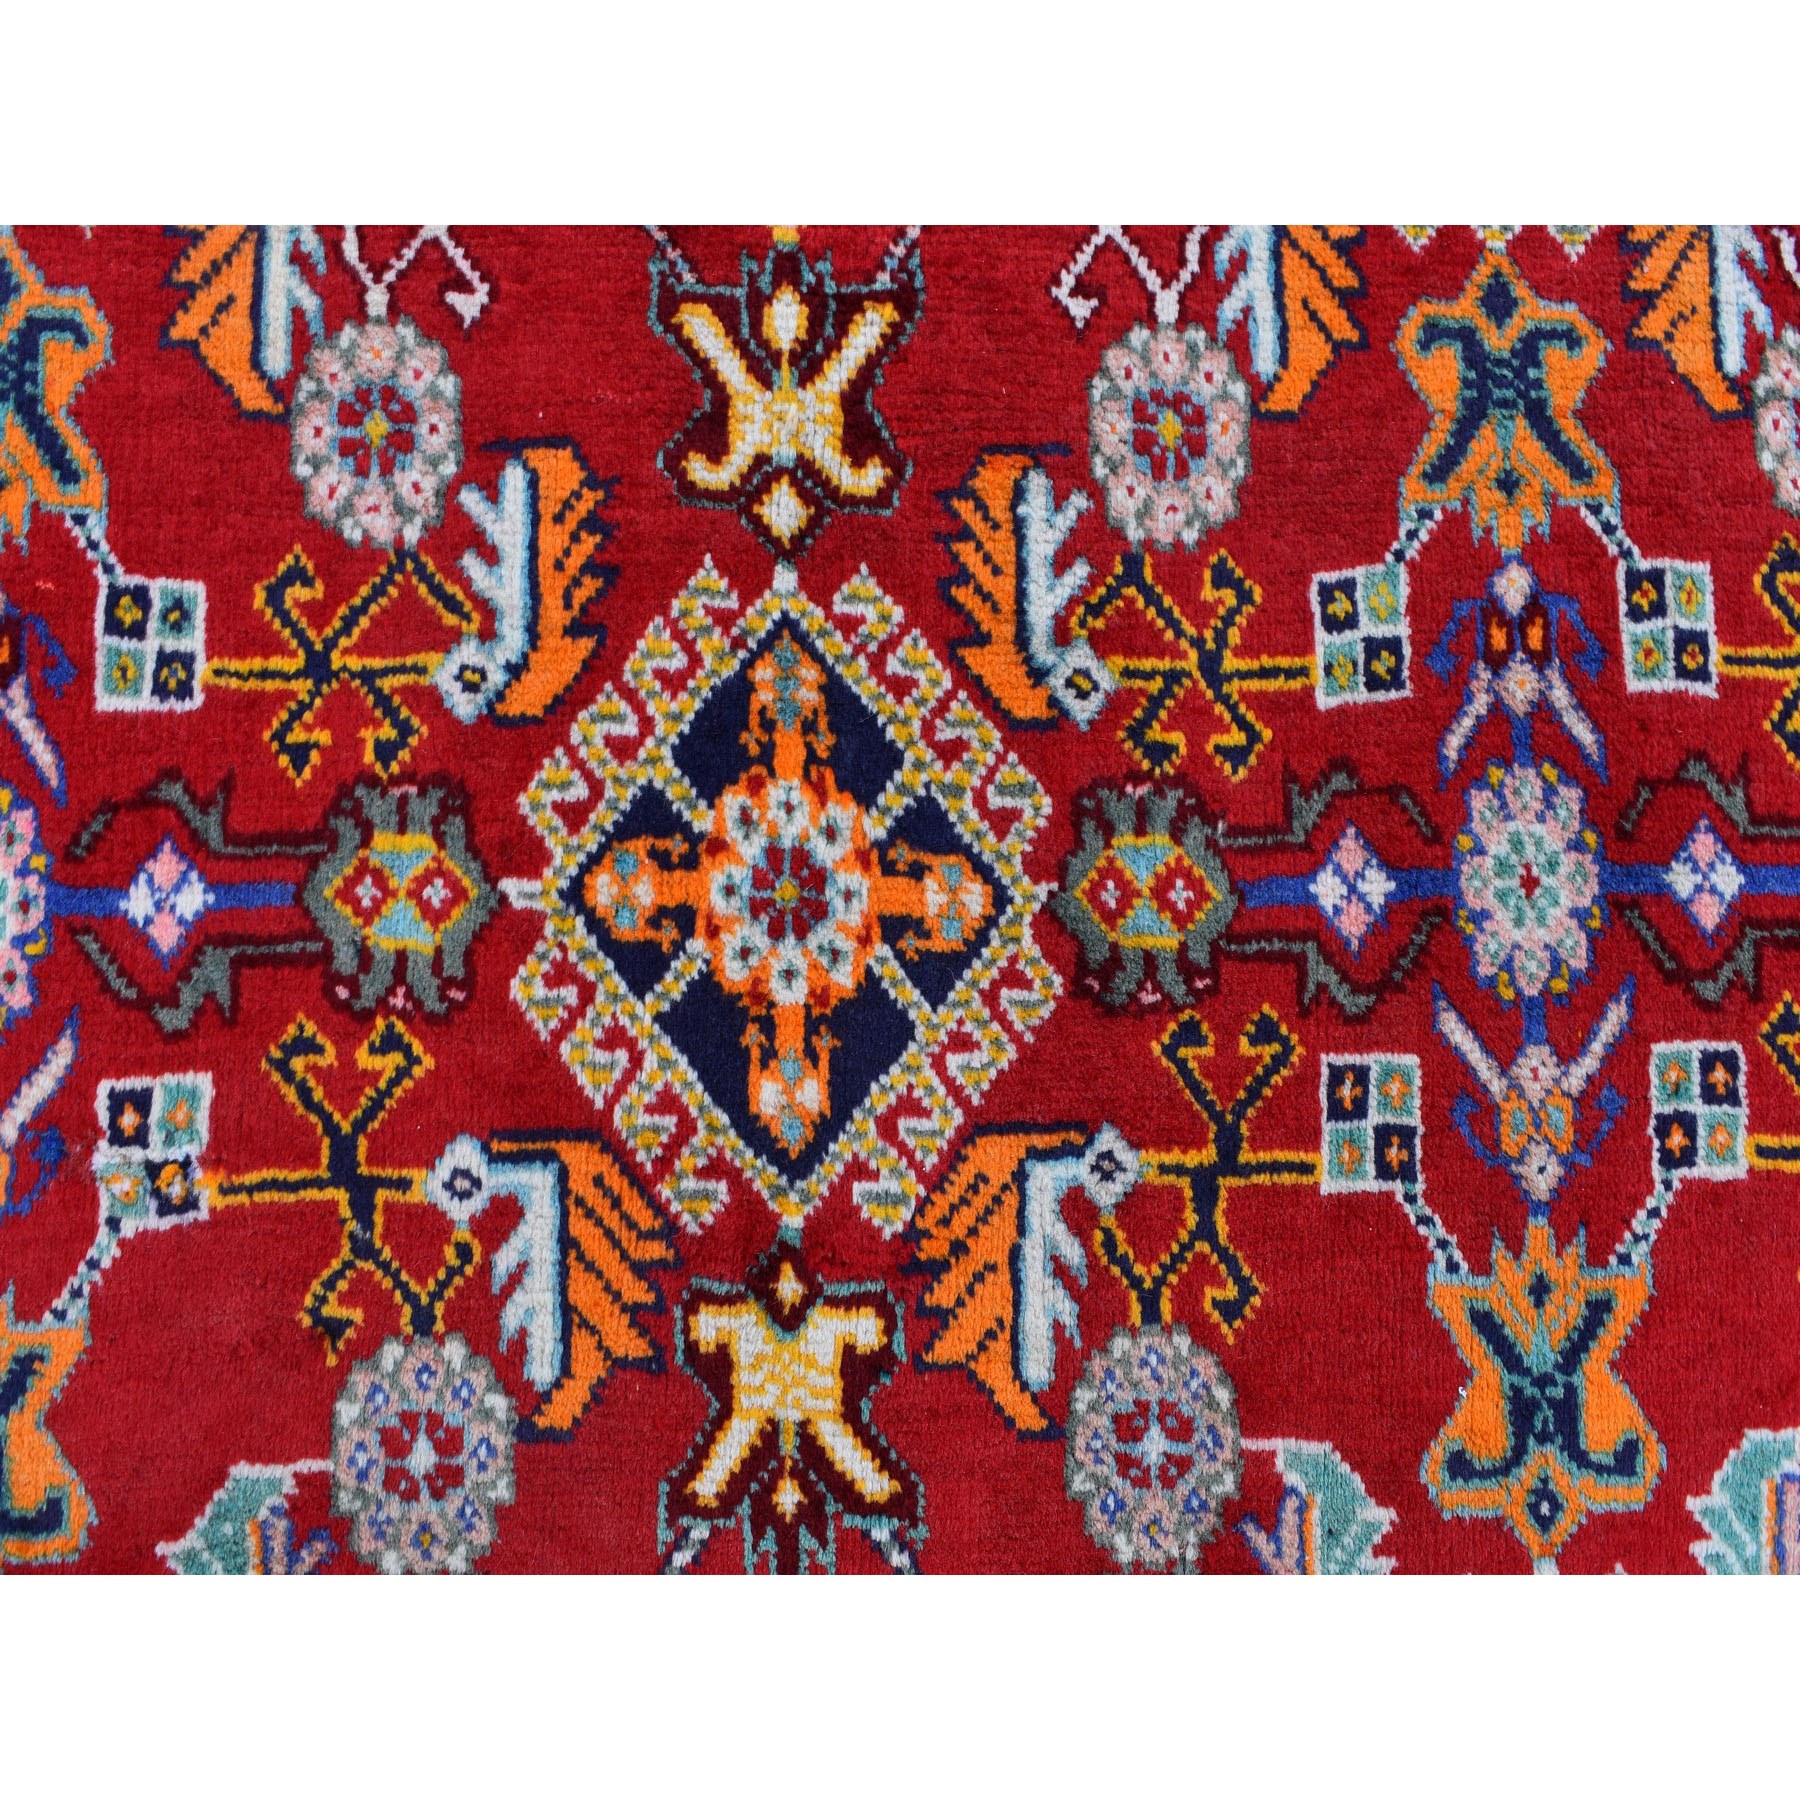 6-9 x10- Red Vintage Persian Shiraz Exc Cond Full Pile Pure Wool Hand Knotted Oriental Rug 